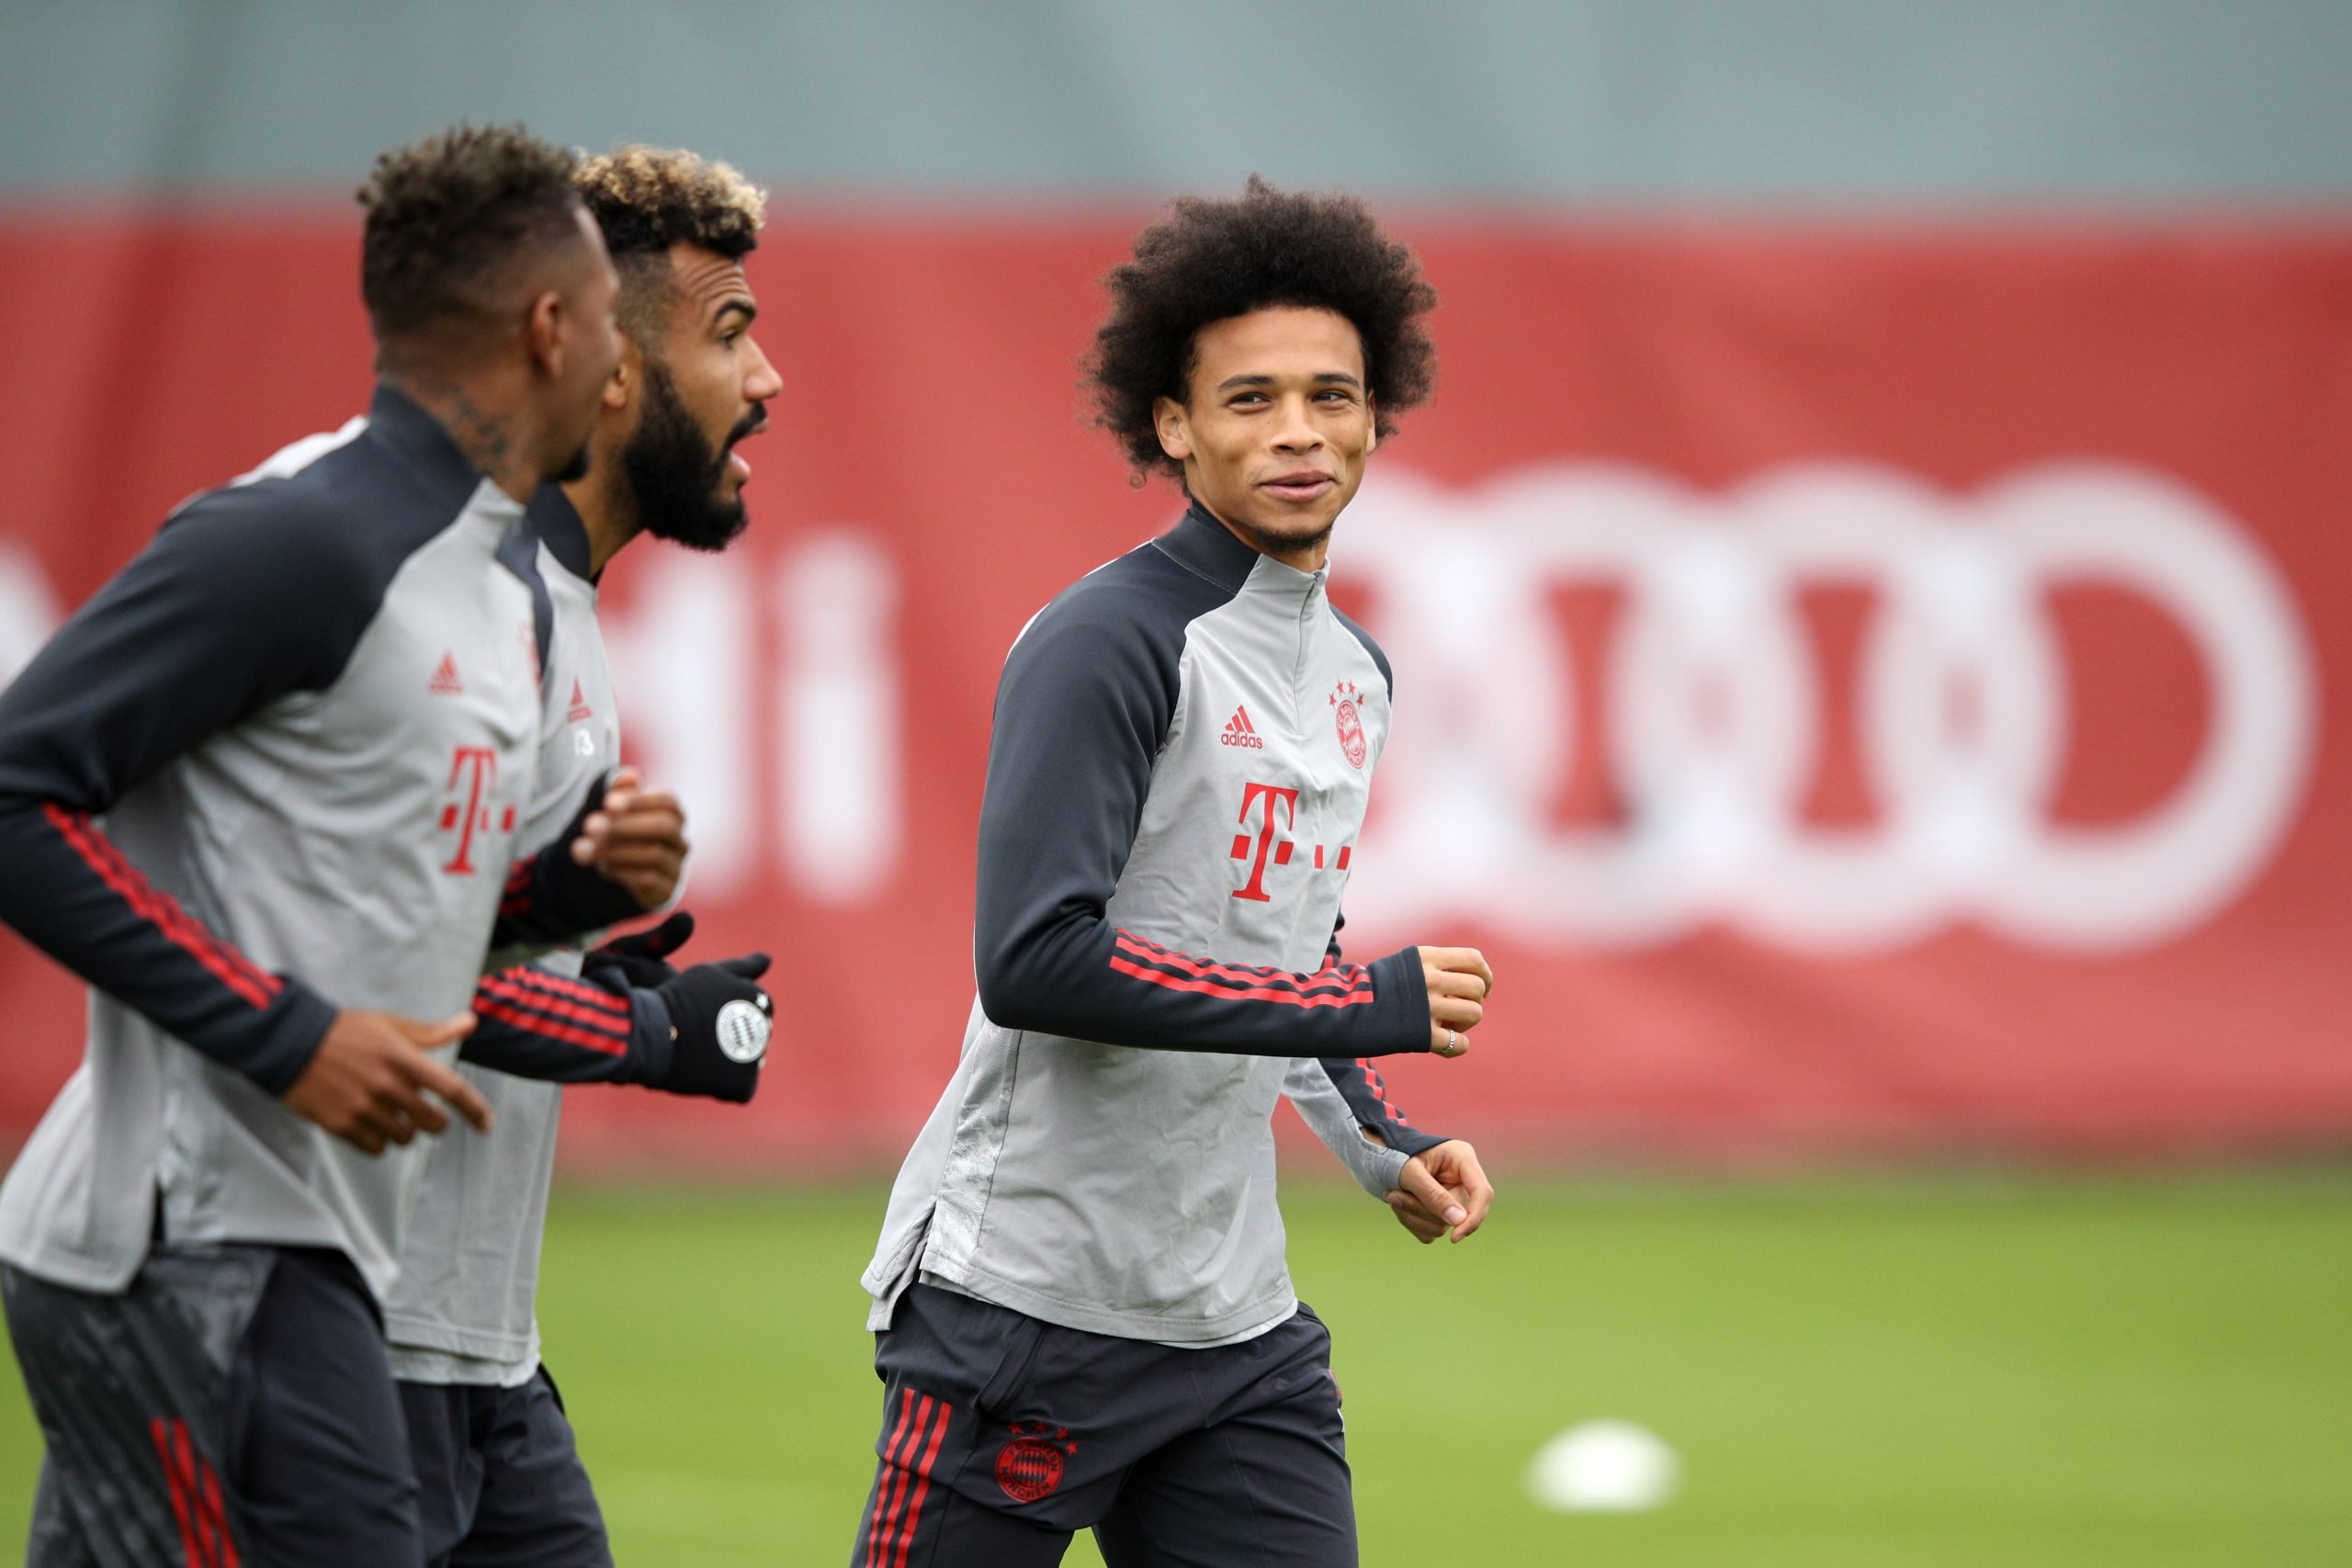 Three players who need to step for Bayern - Sane needs to step up.